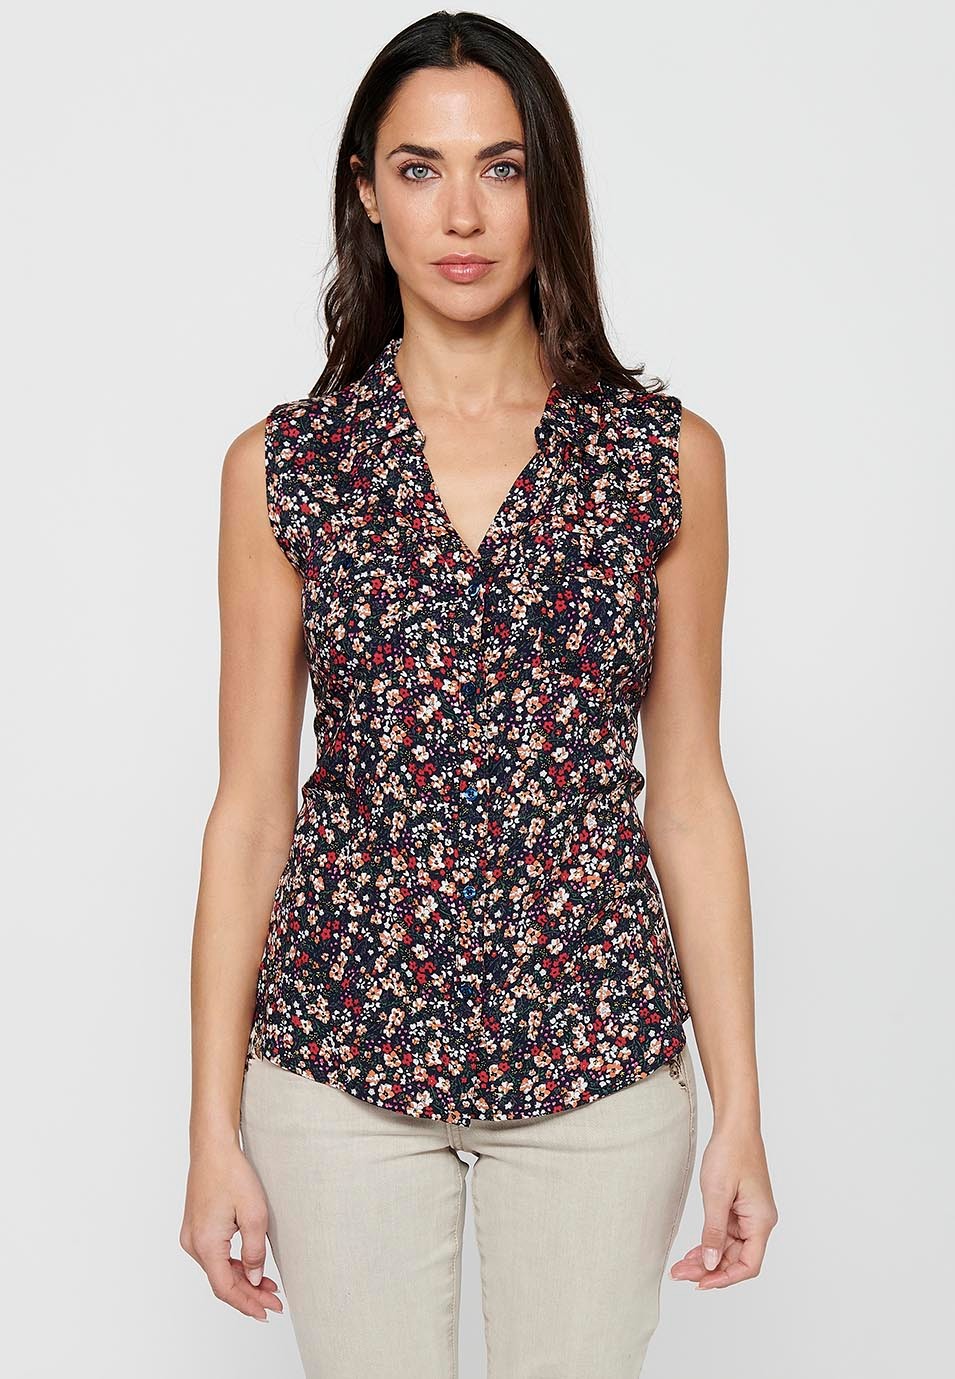 Sleeveless blouse, V-neck, front closure with buttons, floral print for women in Navy 1